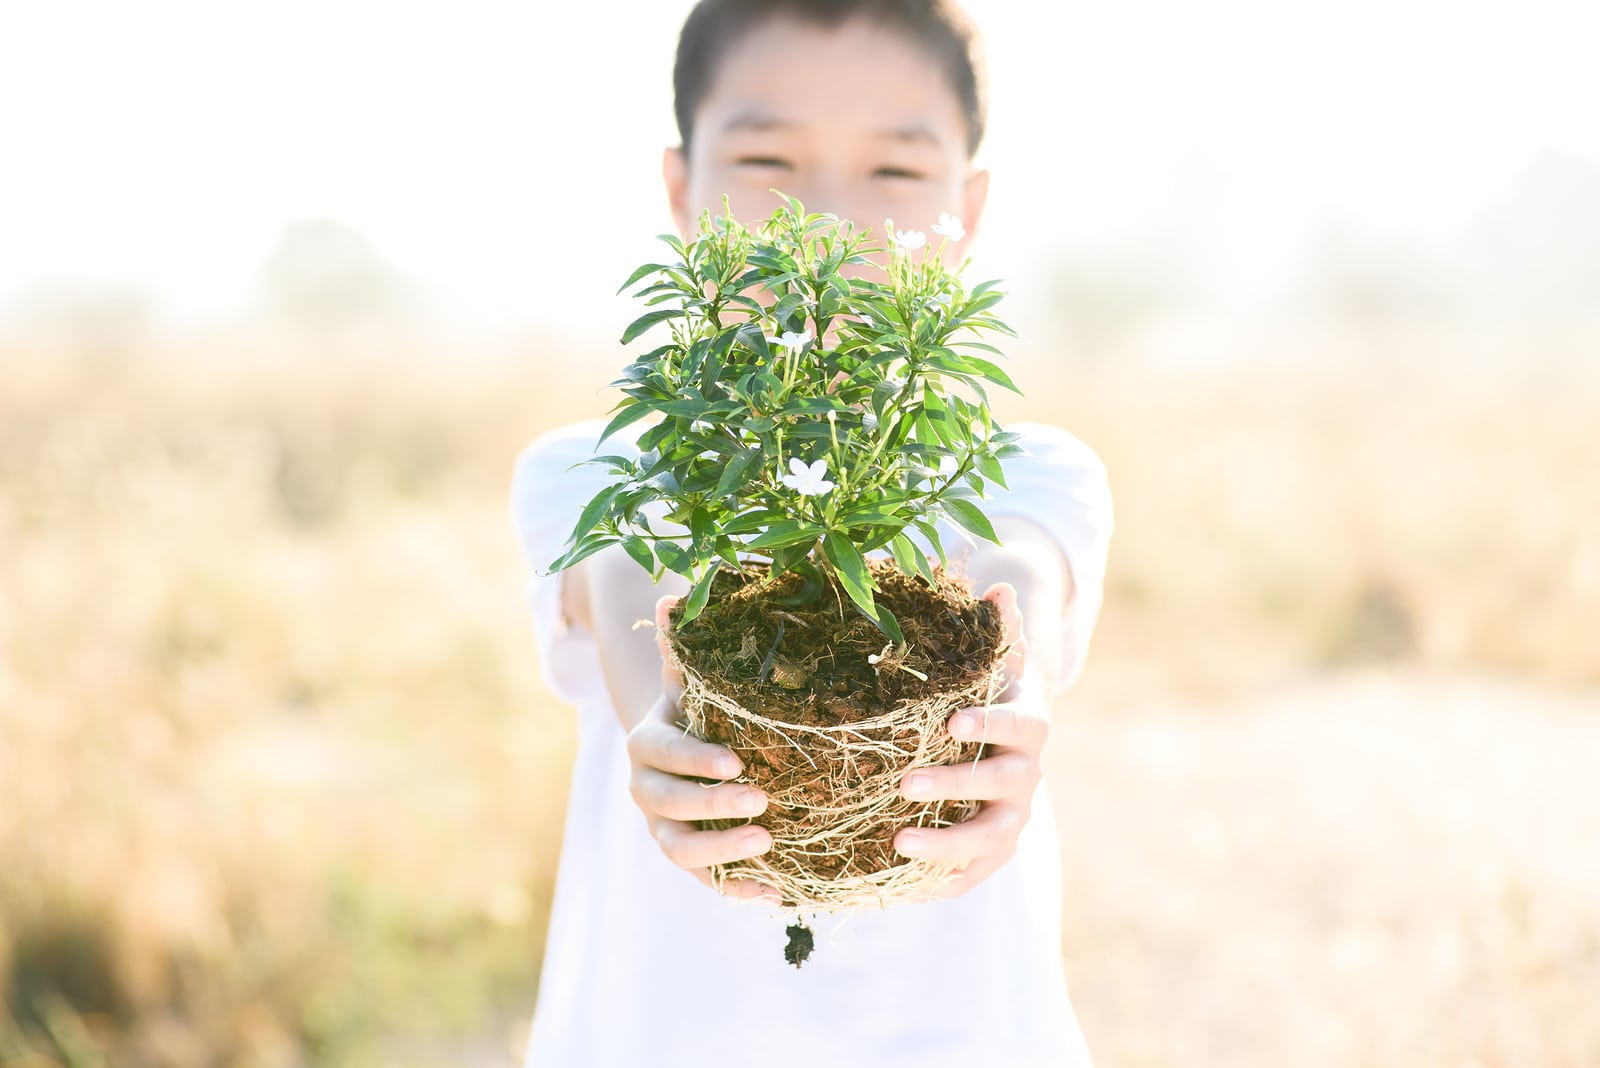 Thin focus on hand Child holding young seedling plant in hands on dry land to plant on soil. Concept Earth day